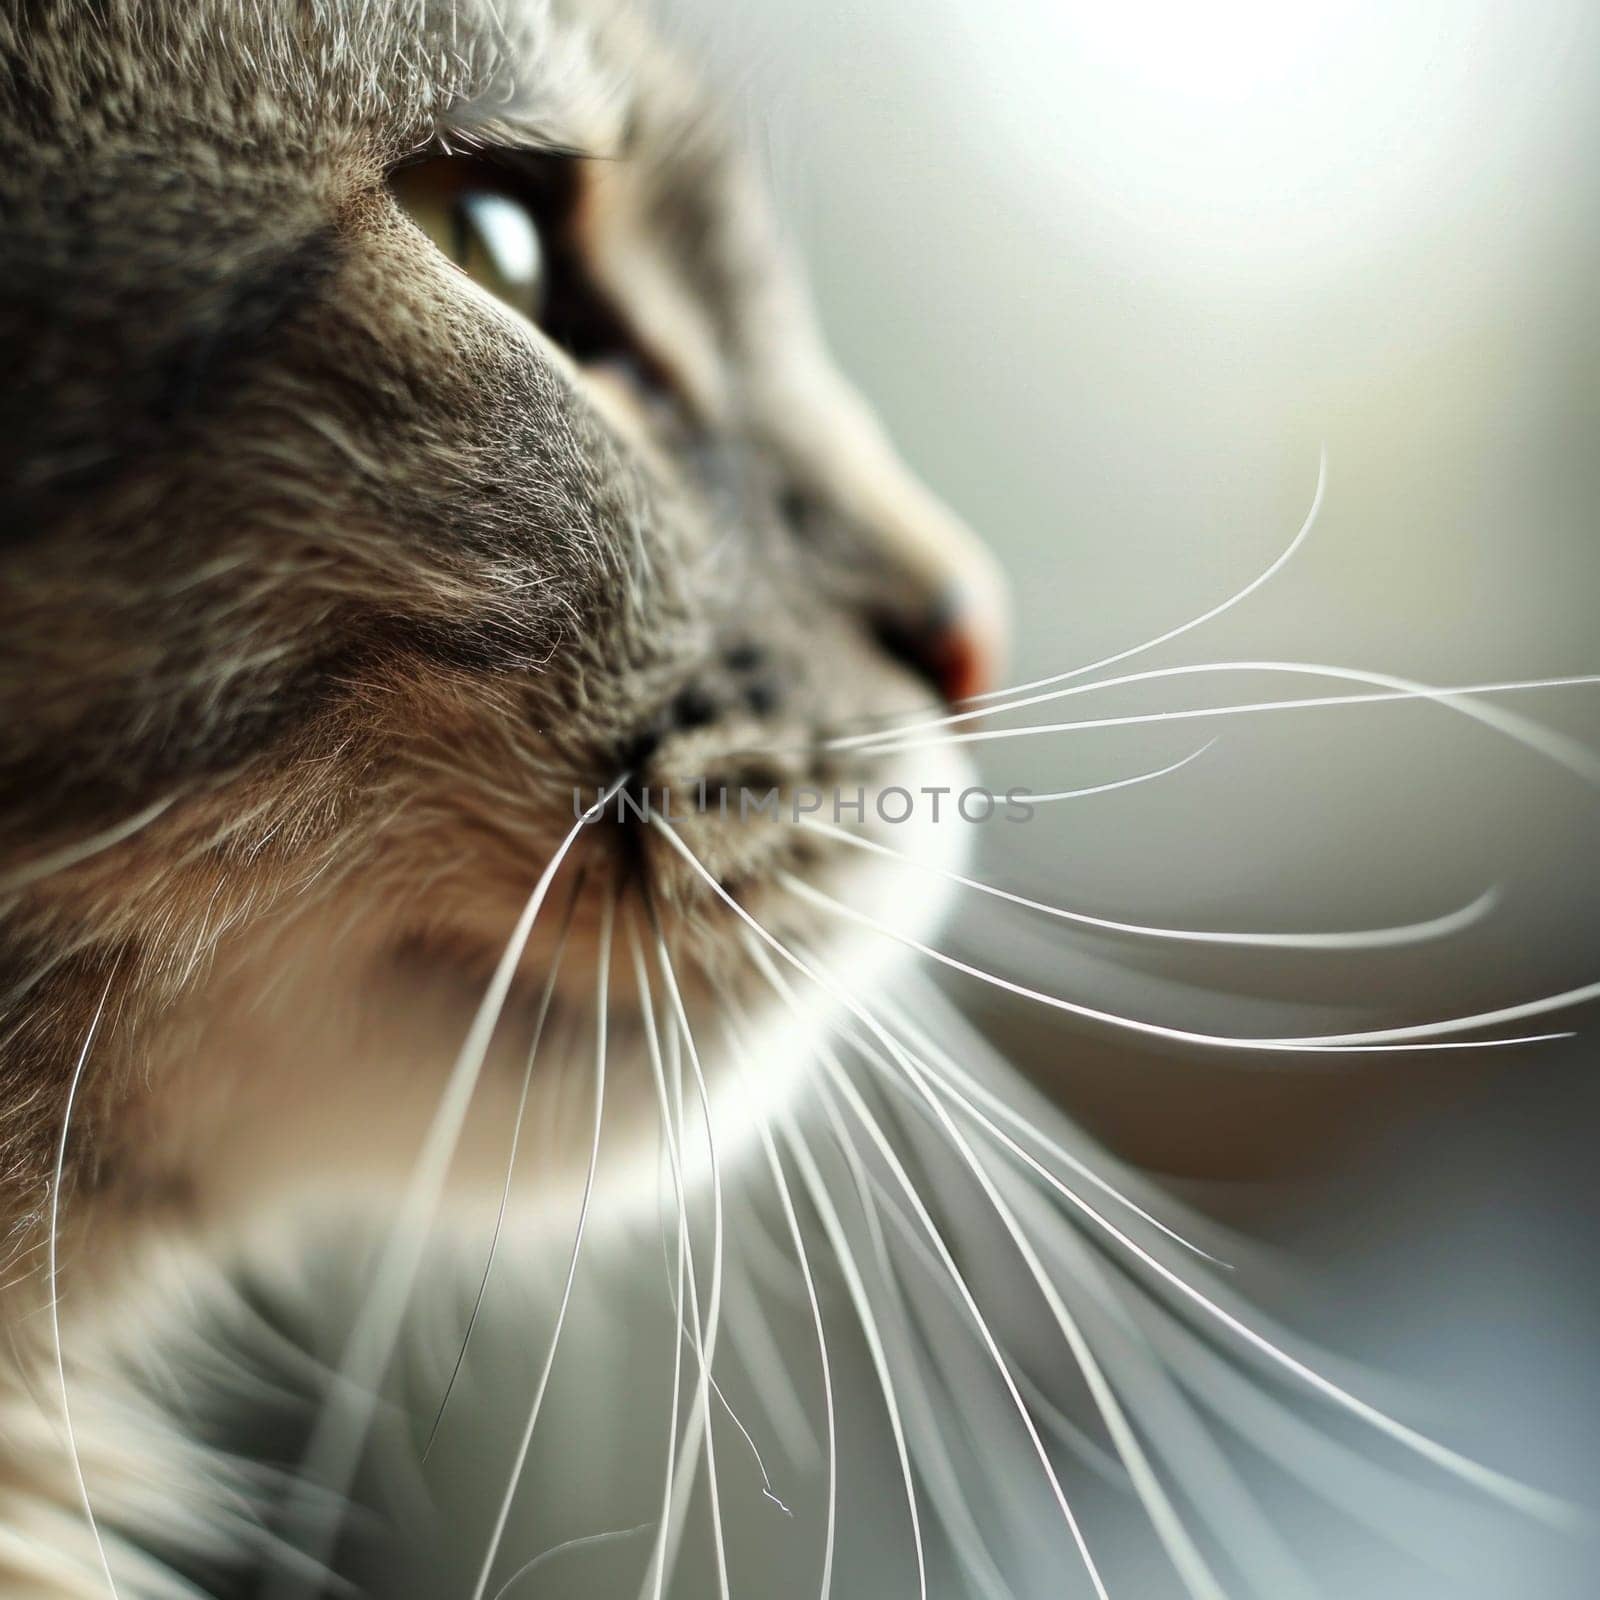 A close up of a cat's face with long whiskers